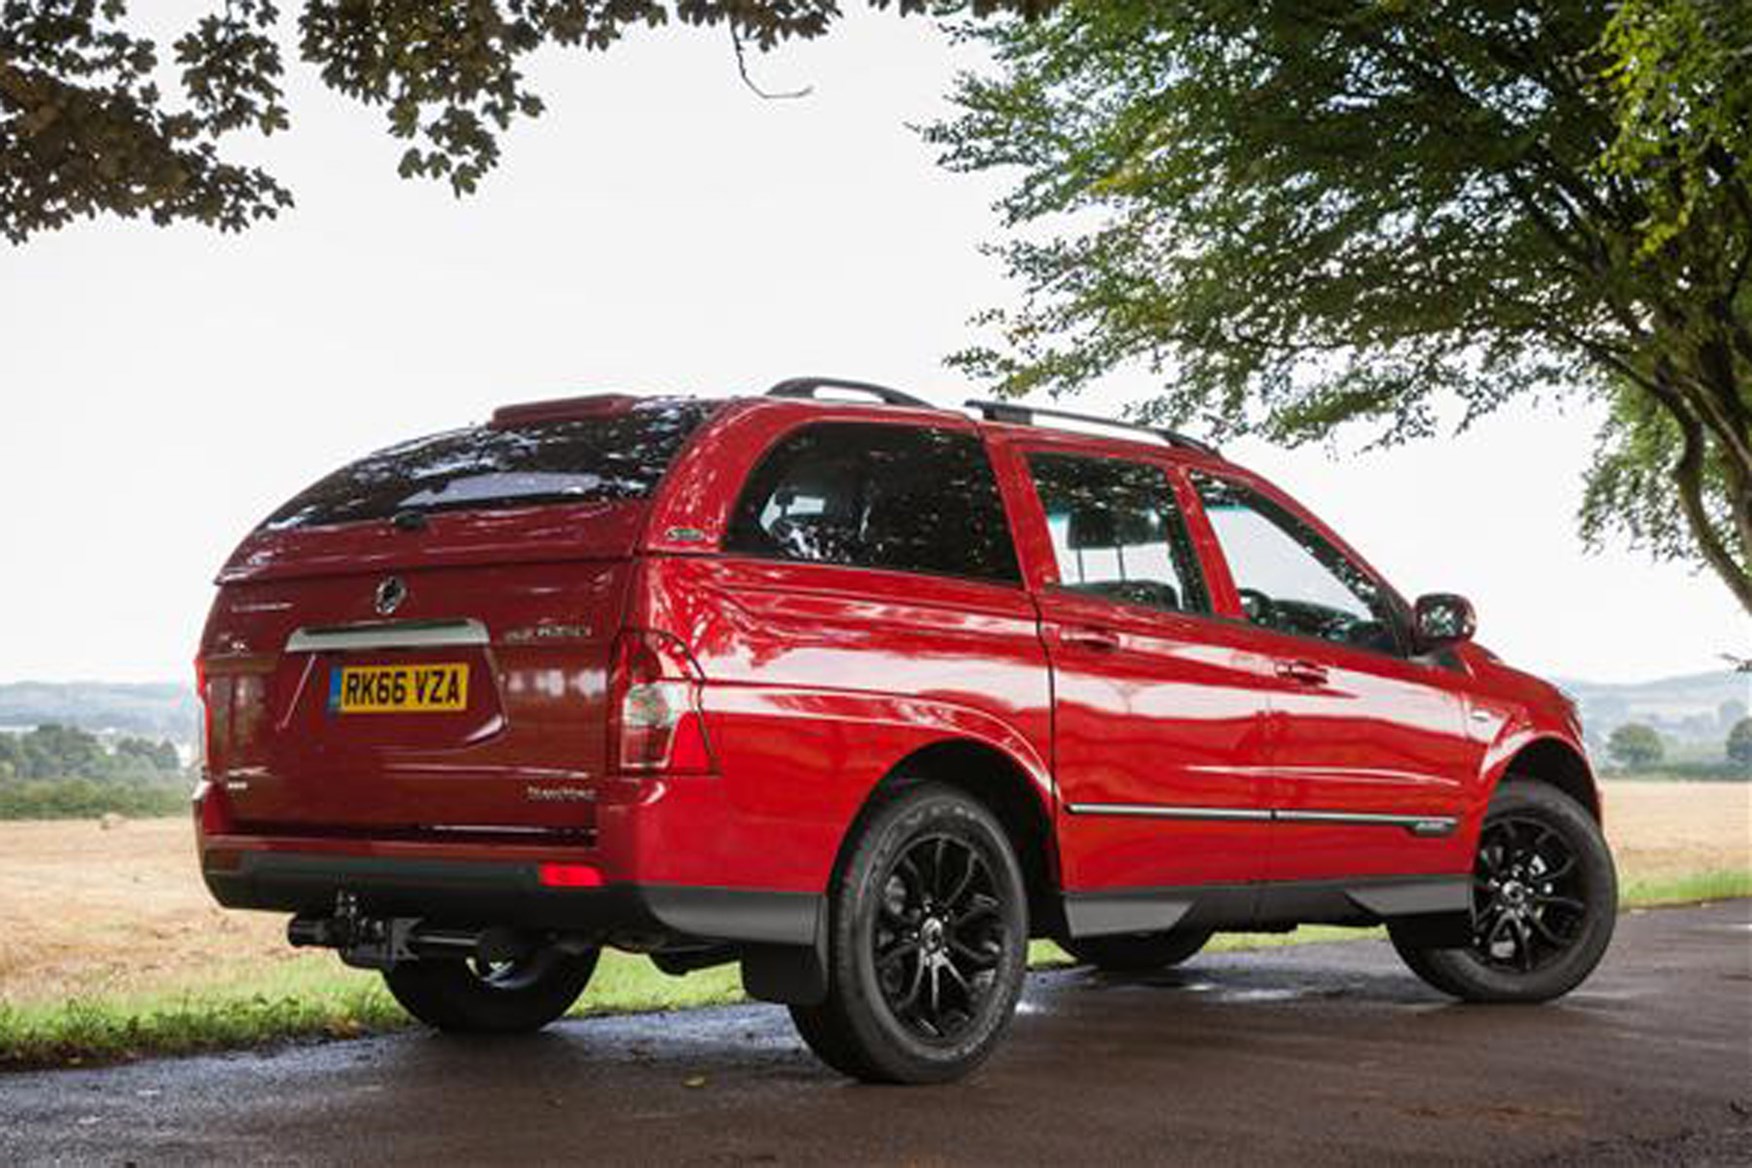 SsangYong Musso full review on Parkers Vans -rear exterior